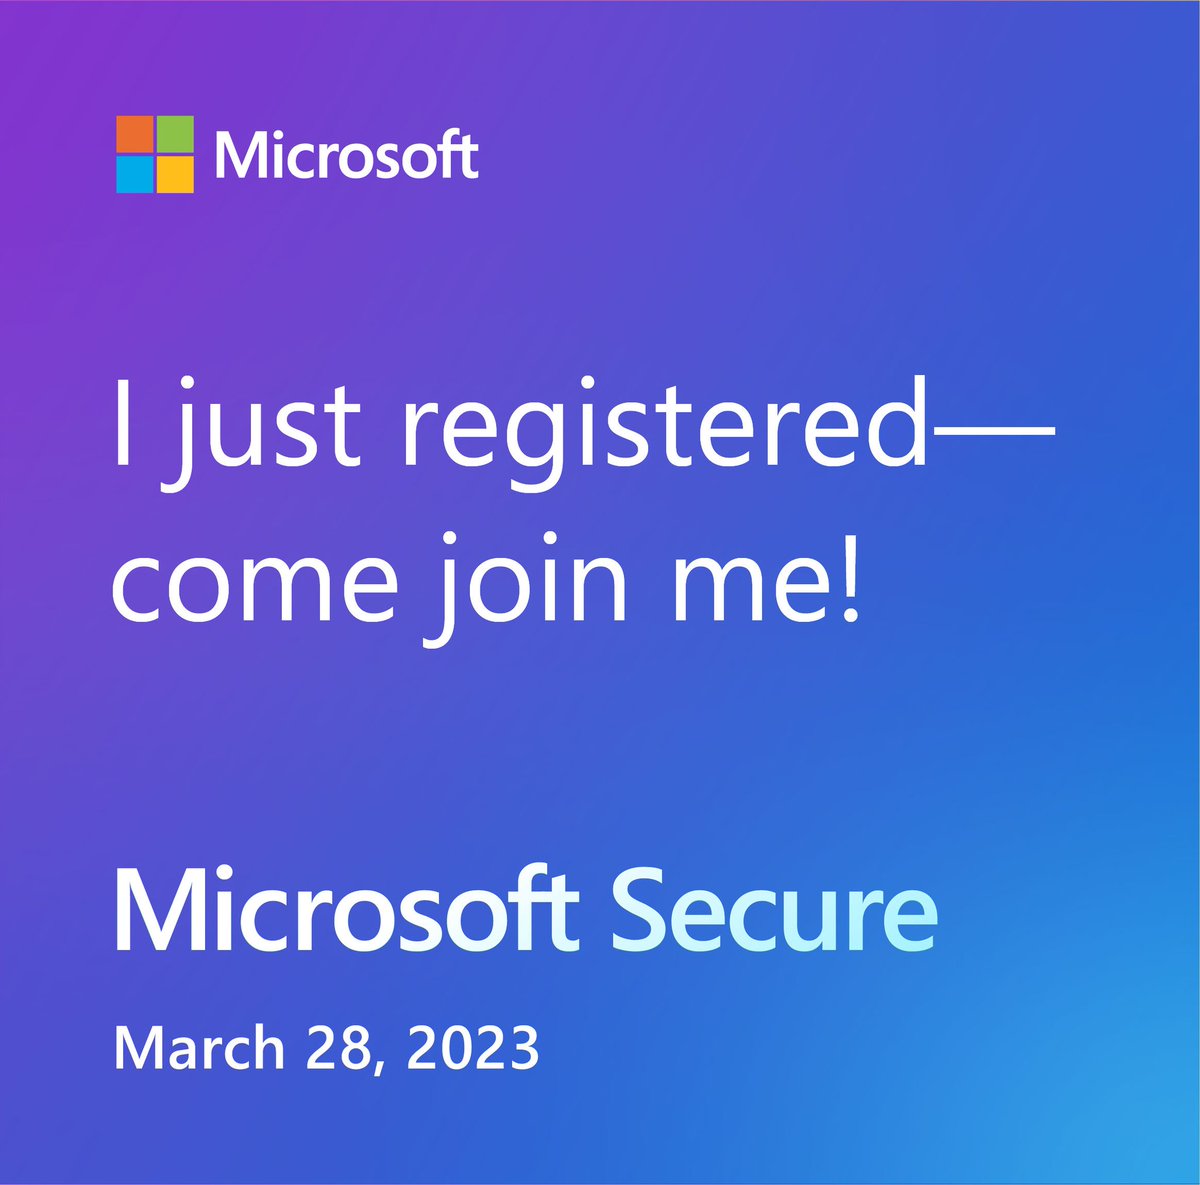 Excited to attend #MicrosoftSecure on March 28, 2023! Can't wait to learn from the experts and level up my cybersecurity knowledge 💻🔒 #CybersecurityMatters